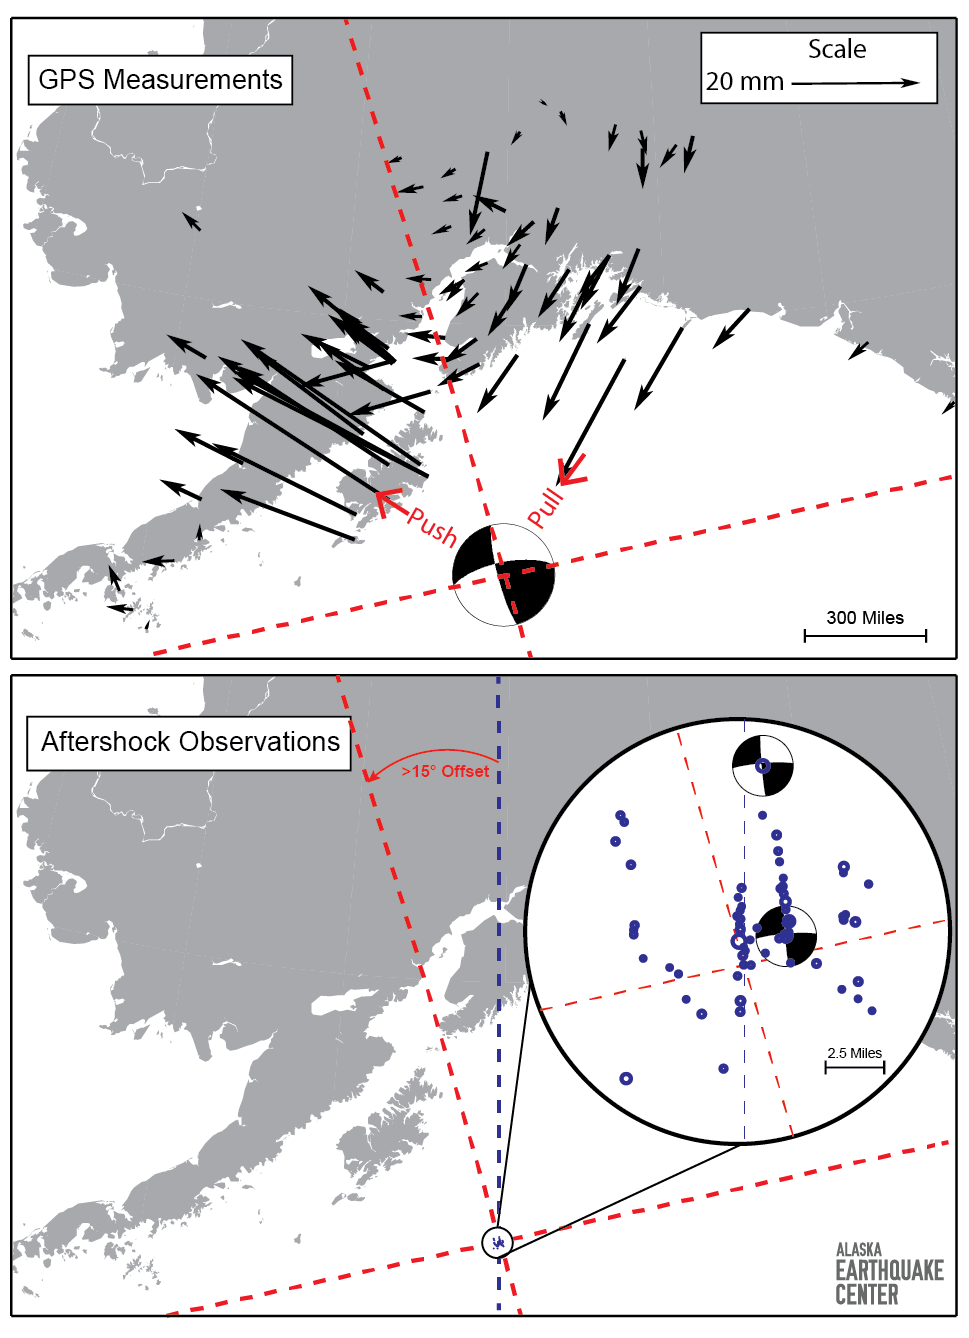 GPS observations of the Magnitude 7.9 Offshore Kodiak Earthquake are shown as black arrows. The beachball shows the USGS focal mechanism (double couple component only).